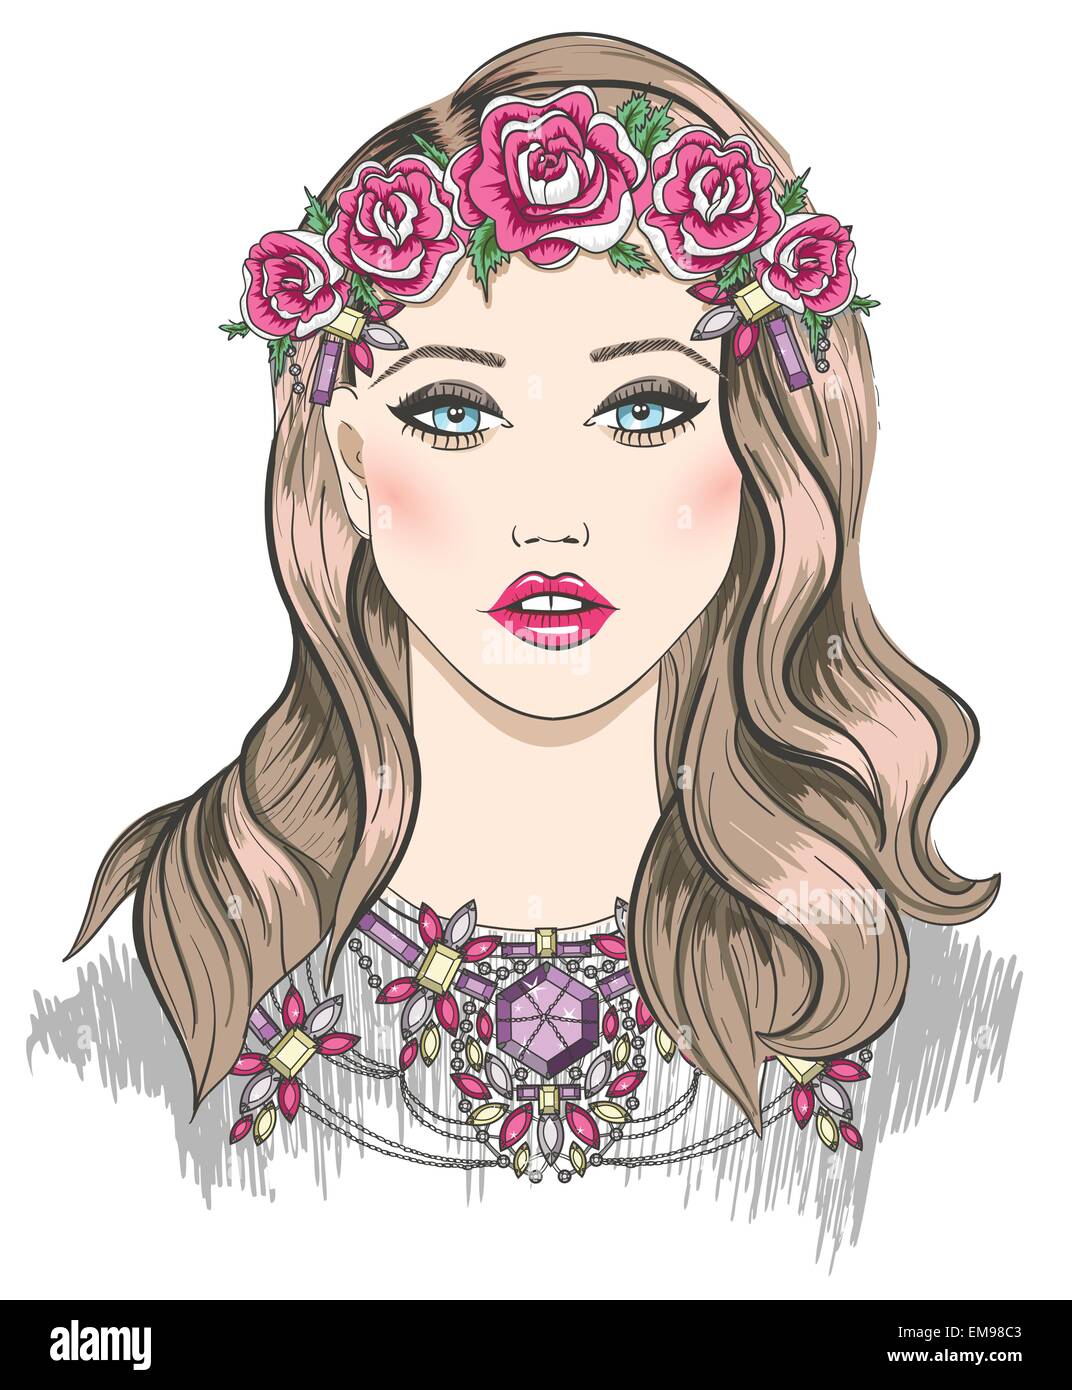 Young girl fashion illustration. Girl with flowers in her hair and statement necklace Stock Vector